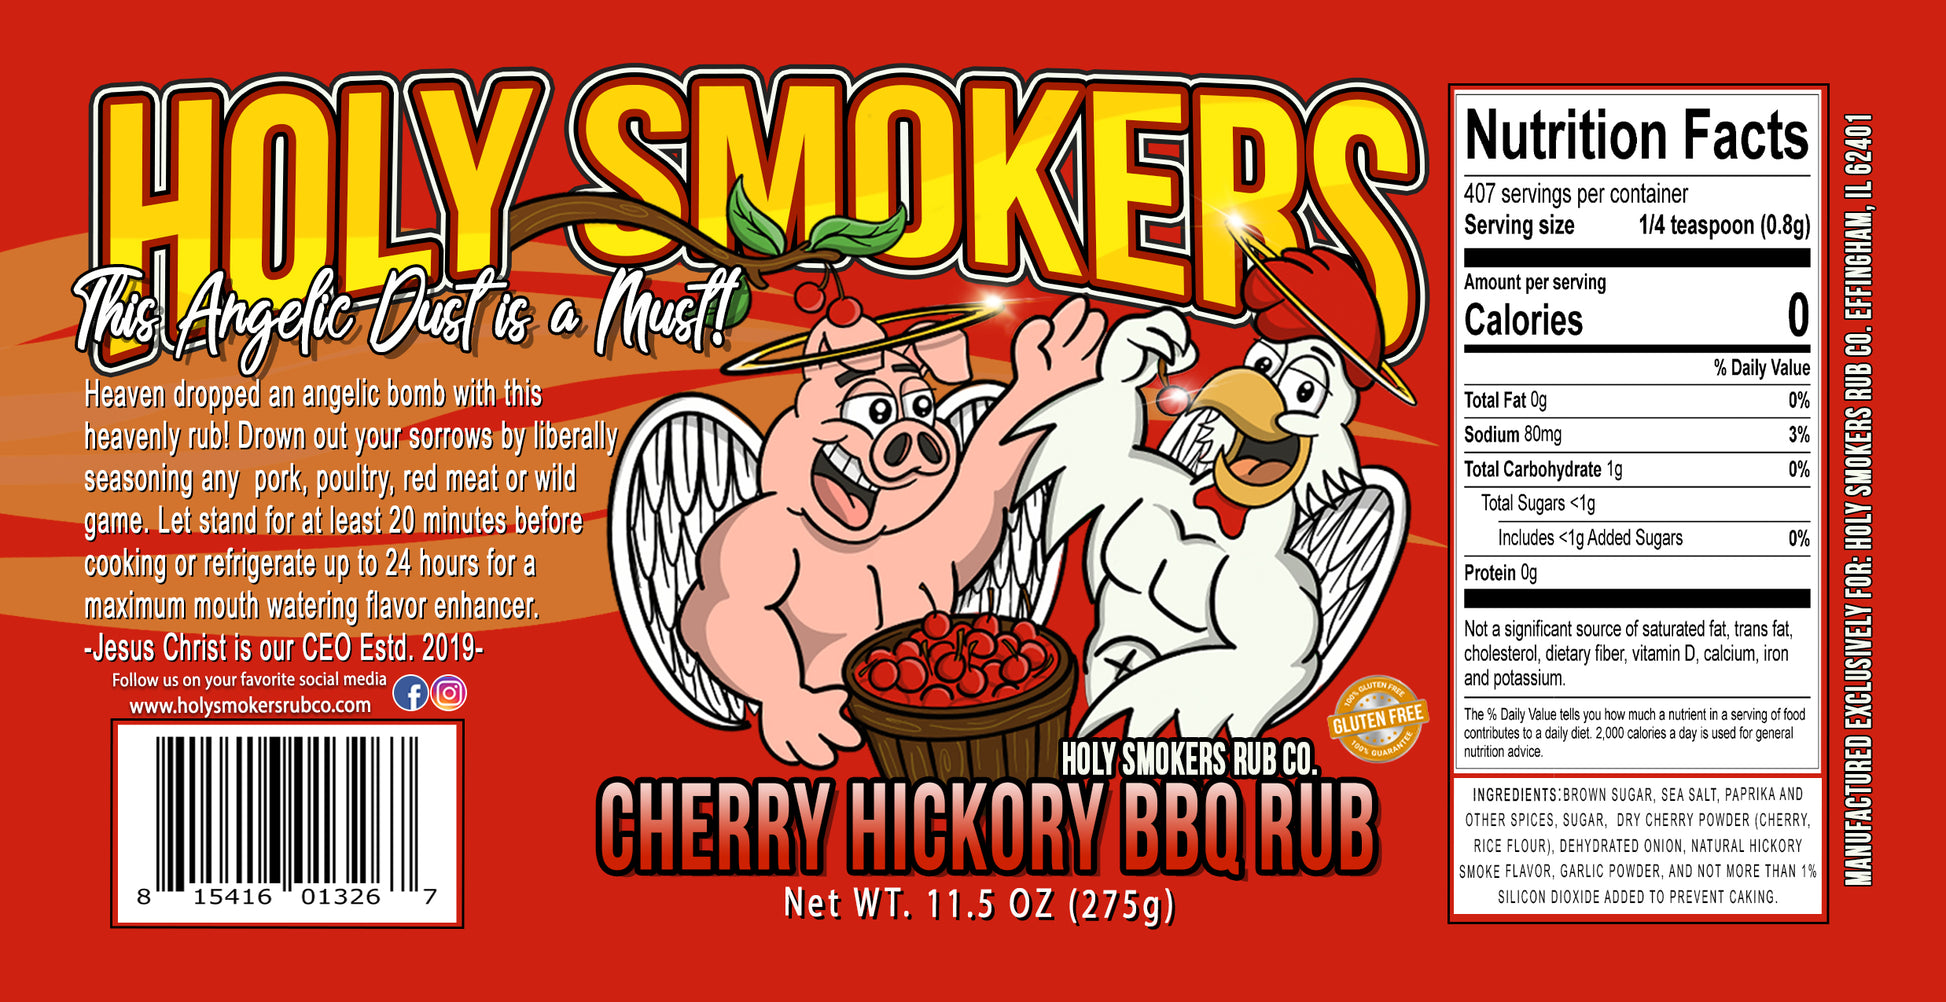 Cherry Hickory BBQ Rub by Holy Smokers Rub Co, for any beef, pork, poultry, sea food and veggies